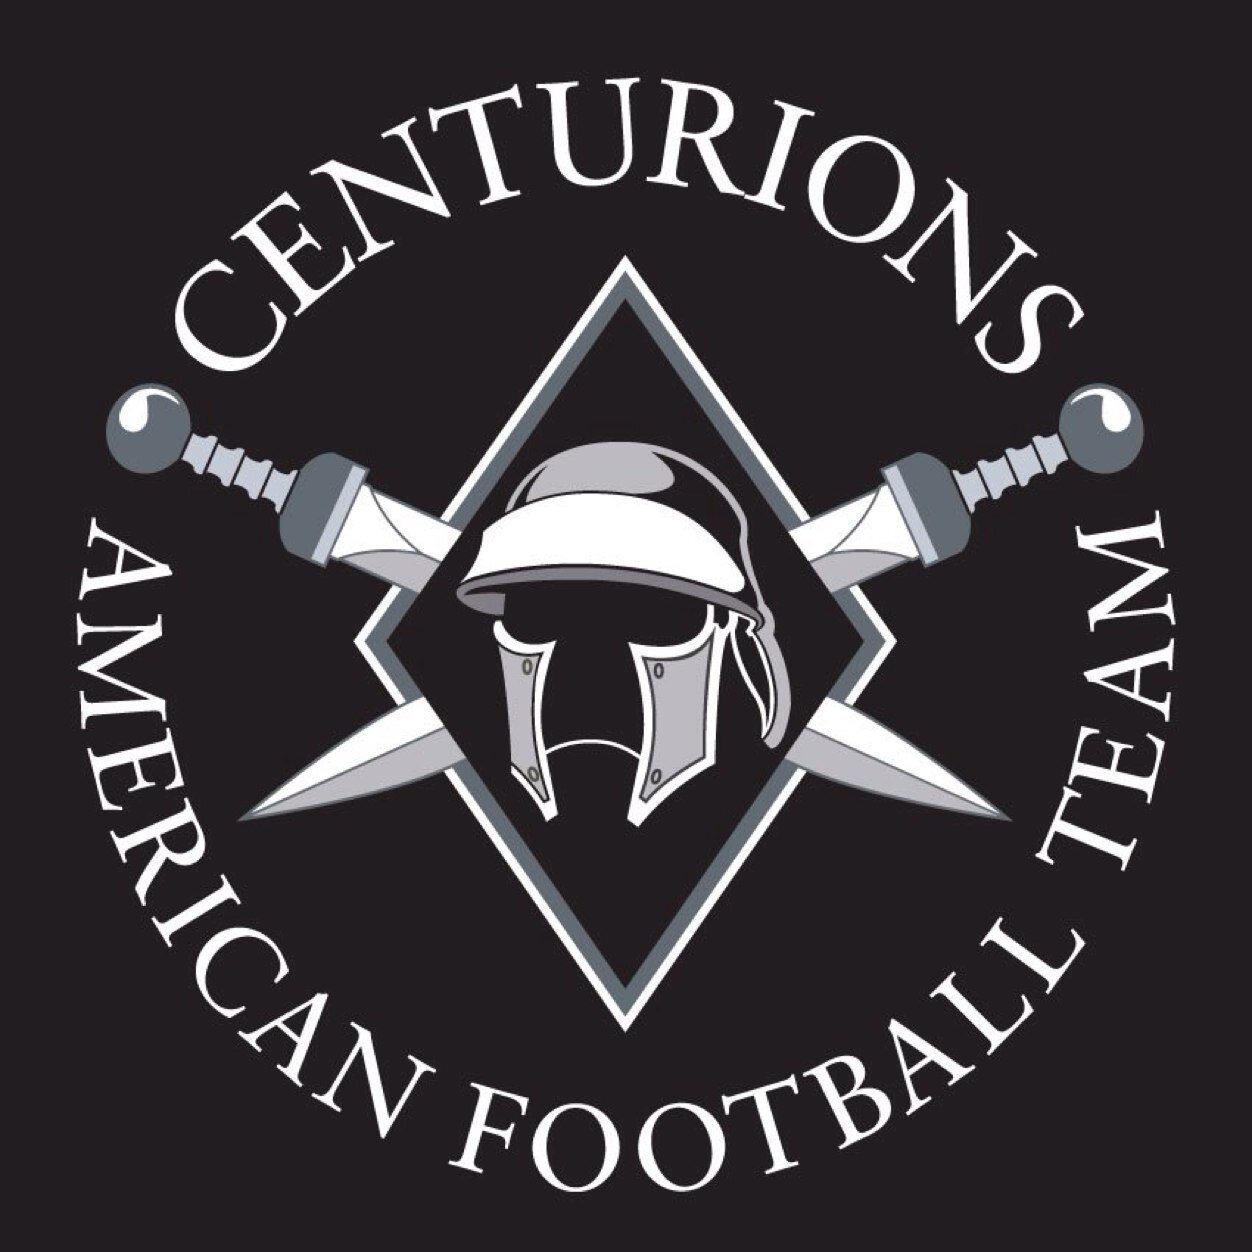 American Football Team founded in 2005. Plays in NSFL & SAFV tournaments. Practice Mon & Wed from 7:30 to 9:30 pm